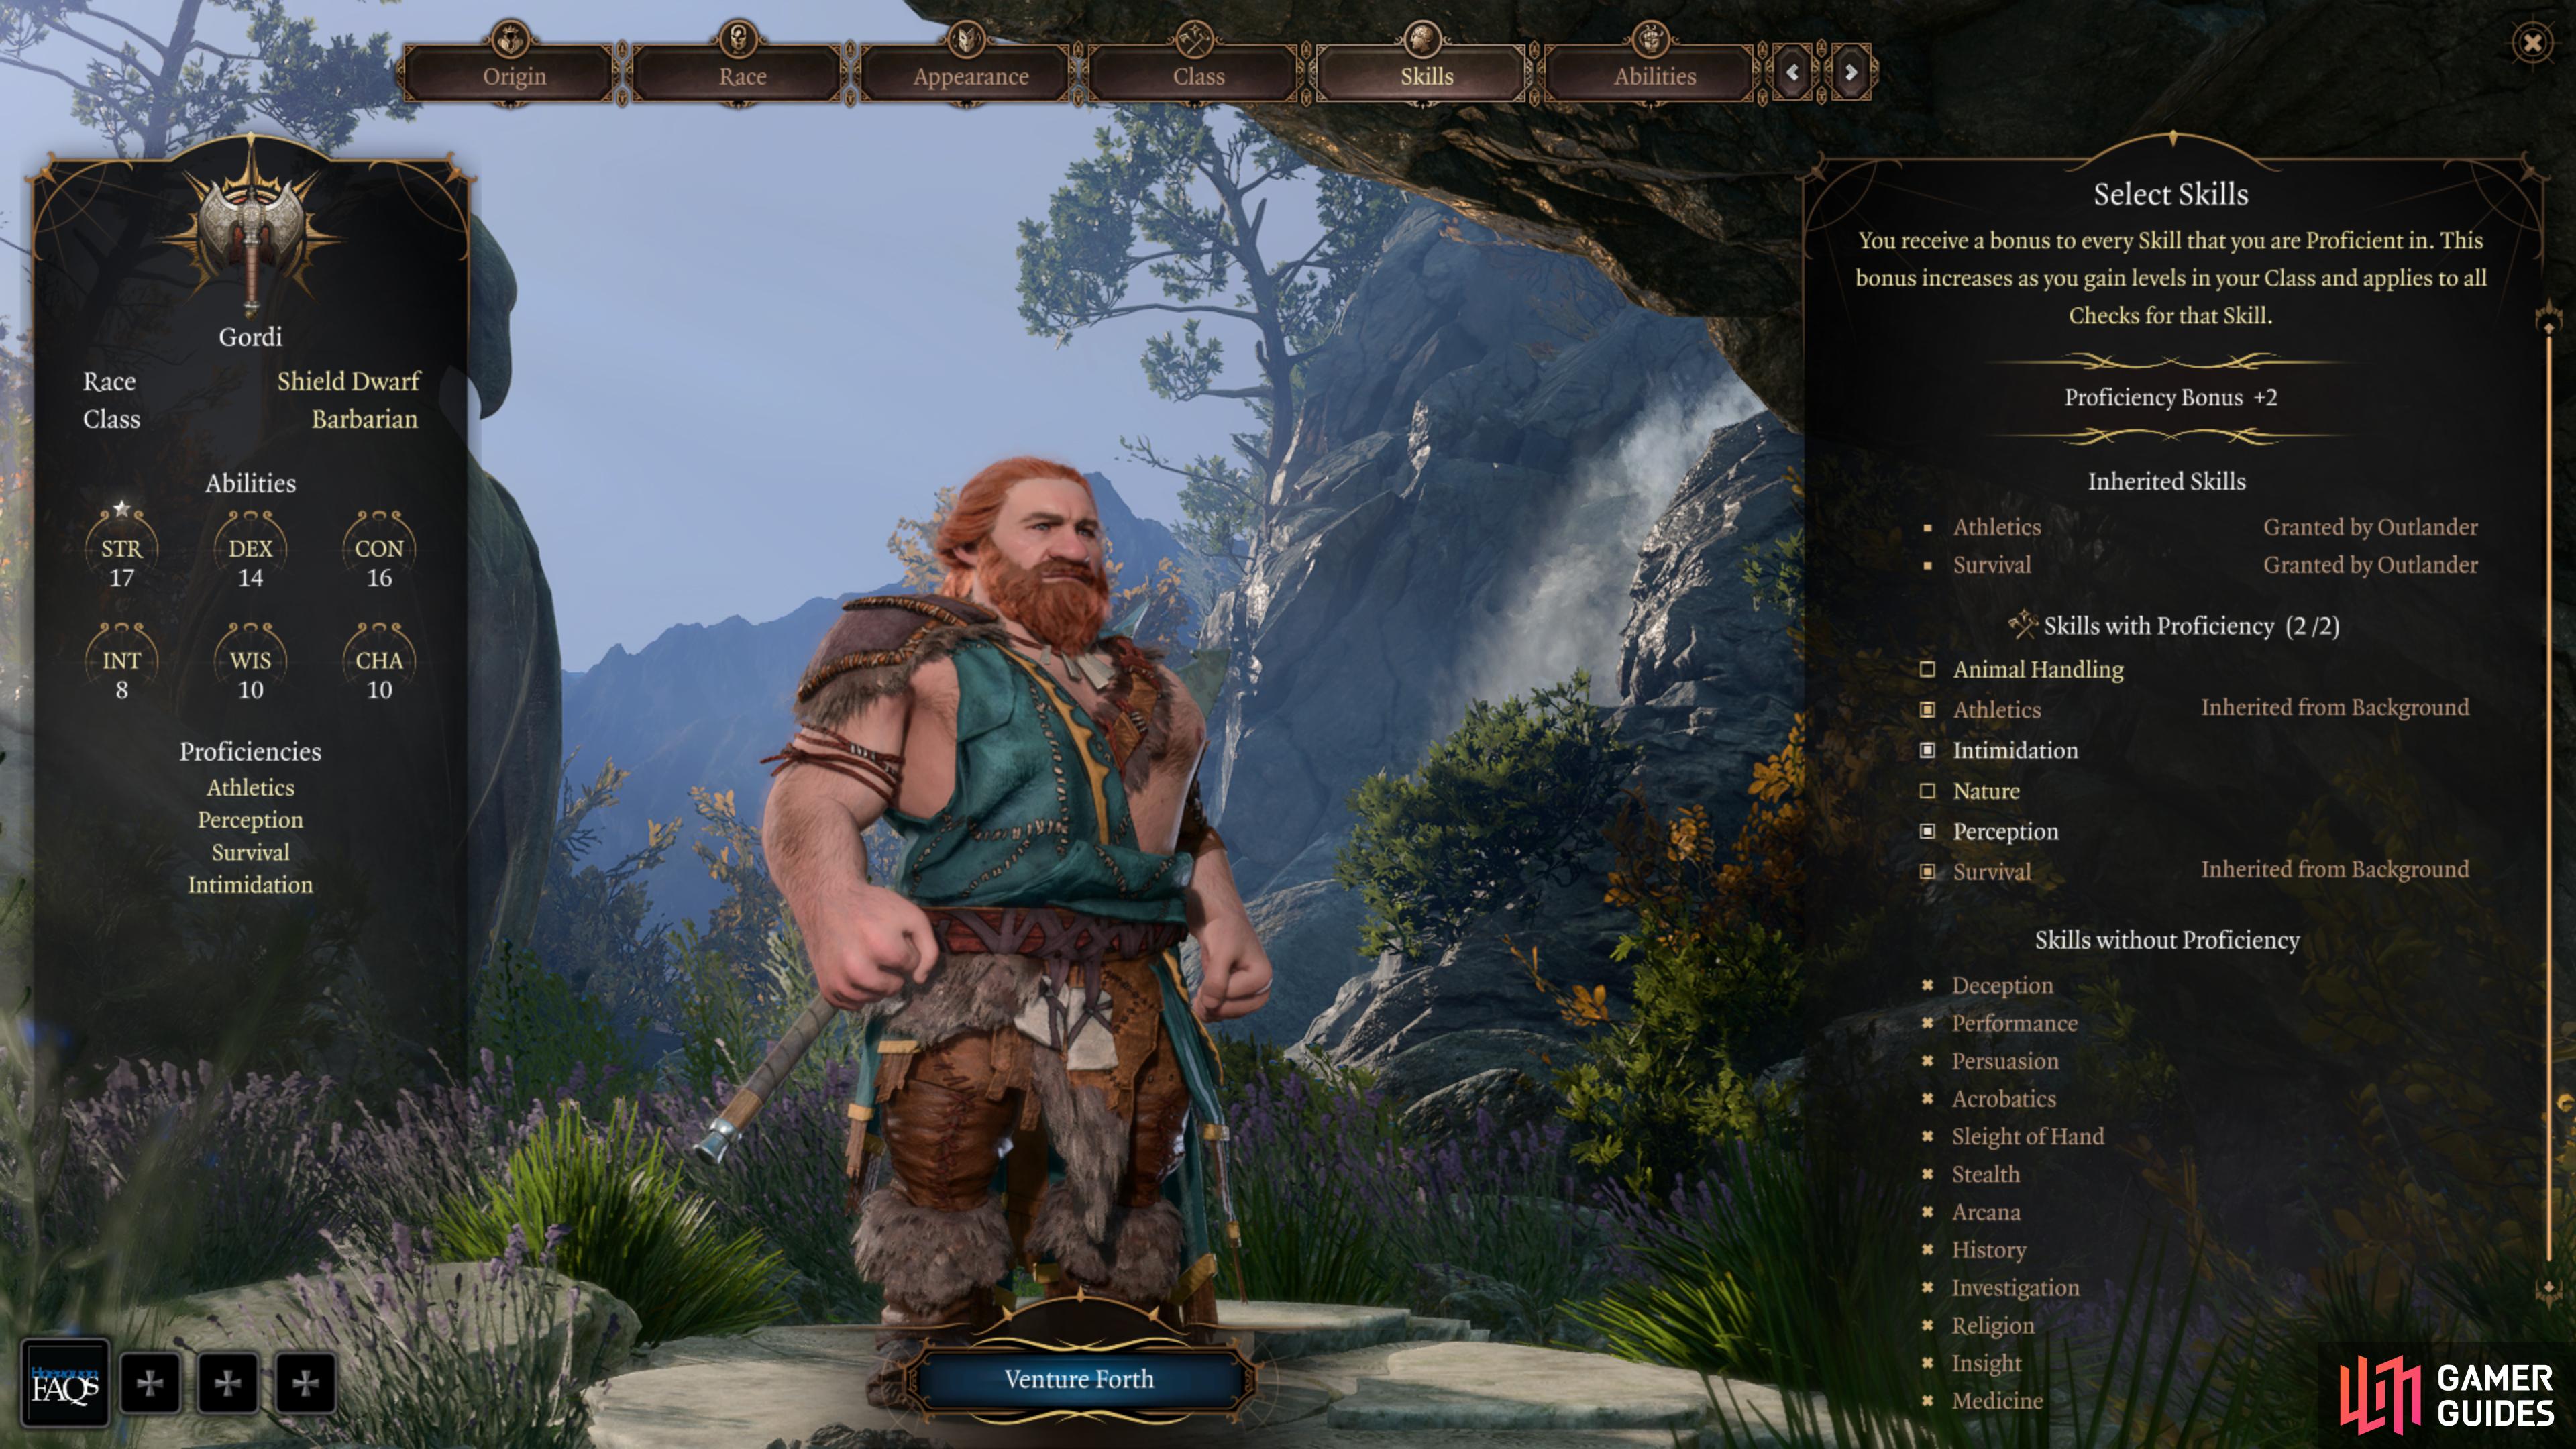 The Barbarian’s starting skill list includes Athletics, Intimidation and Survival.